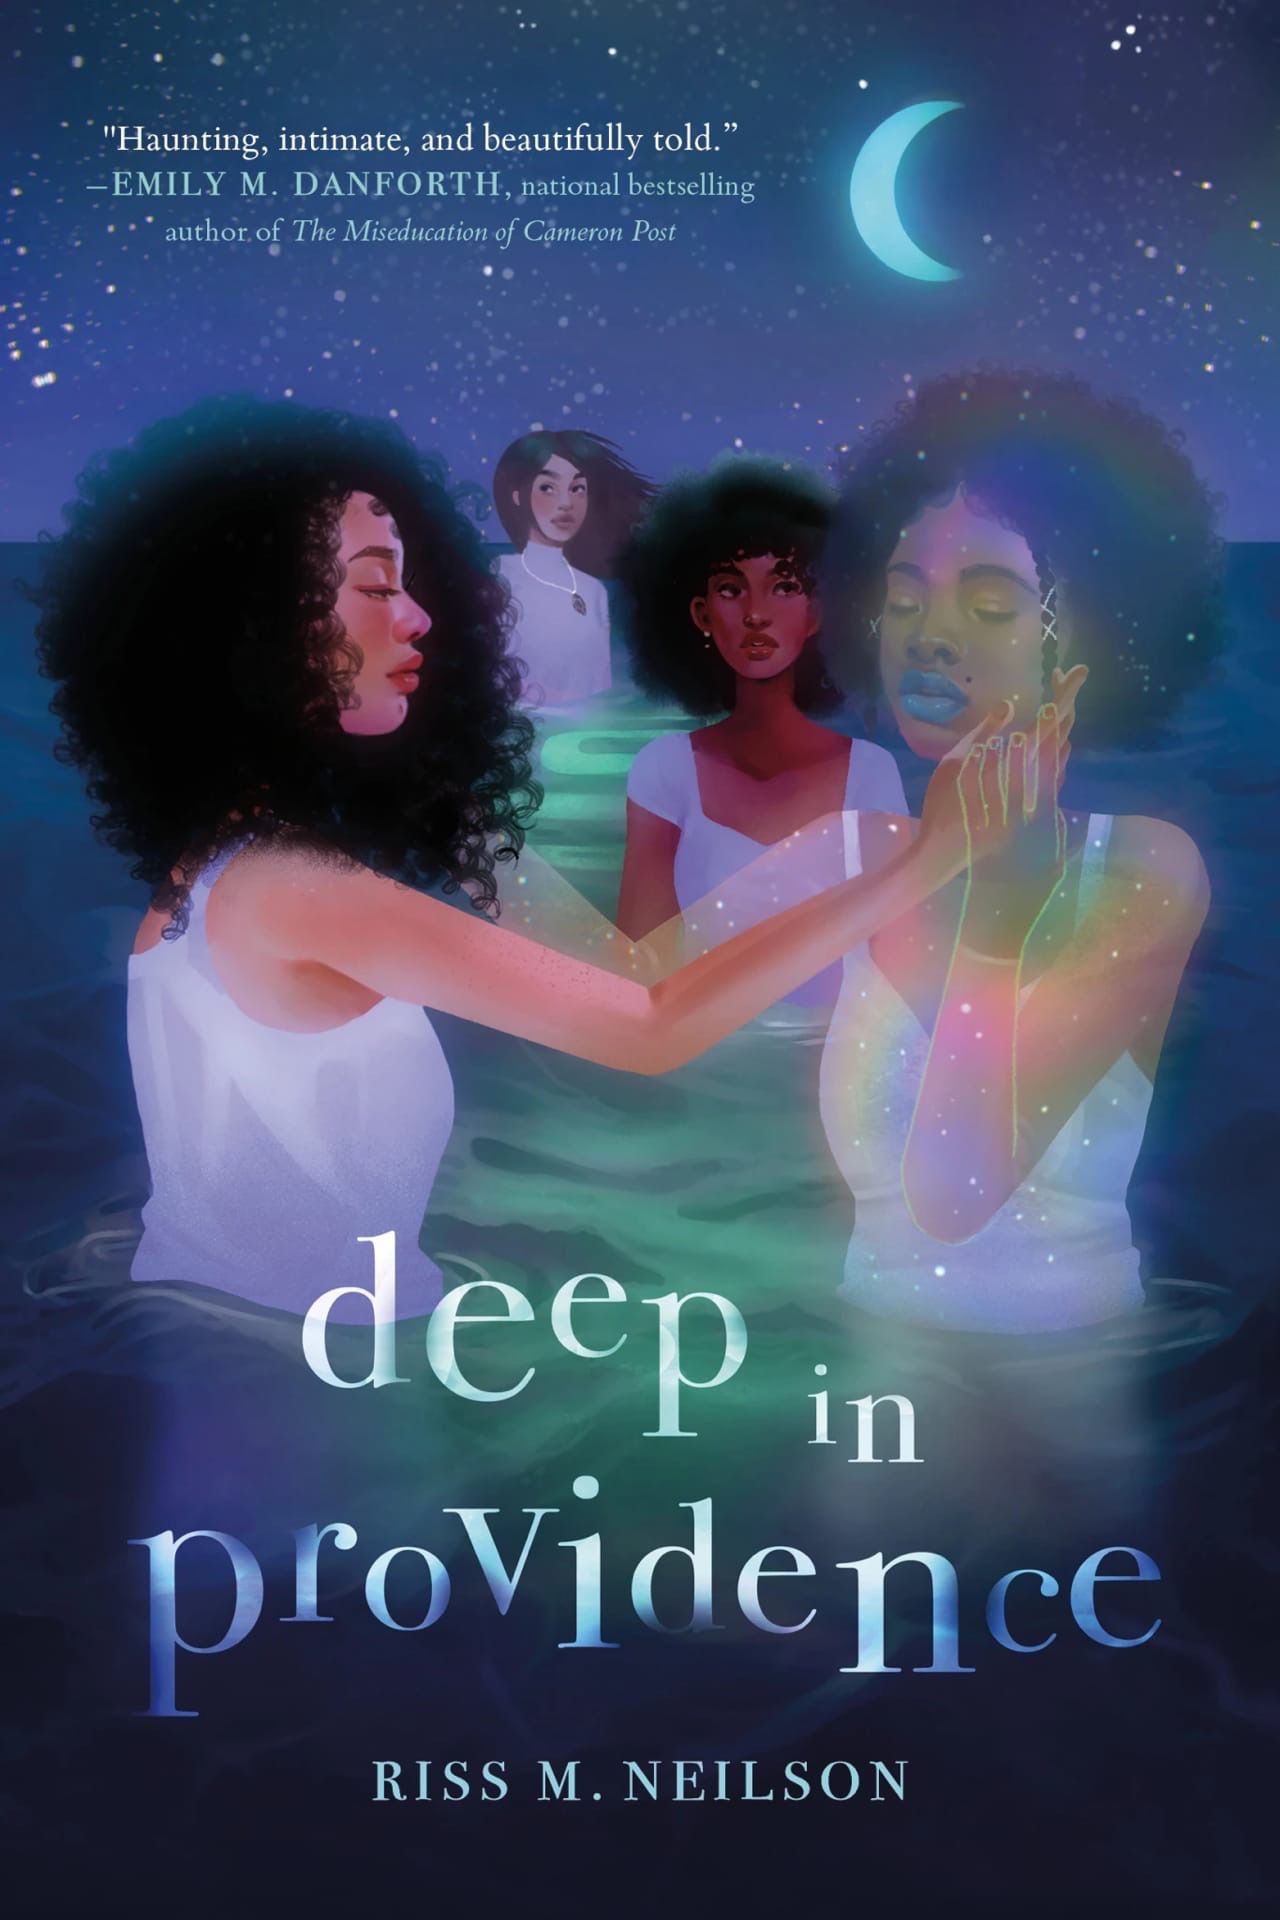 Book Cover for Deep in Providence by Riss M. Neilson